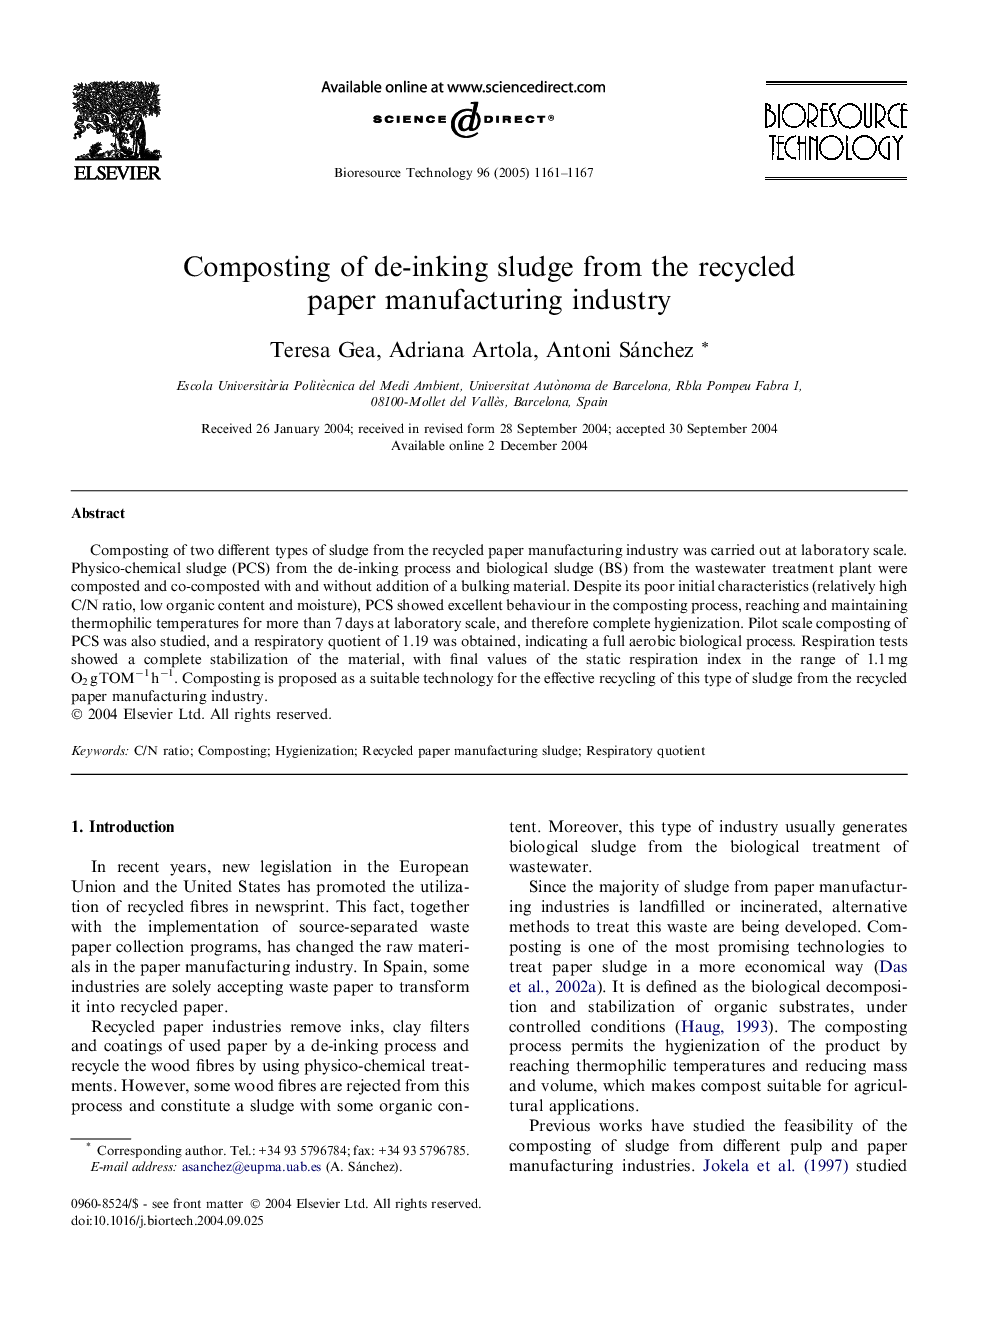 Composting of de-inking sludge from the recycled paper manufacturing industry